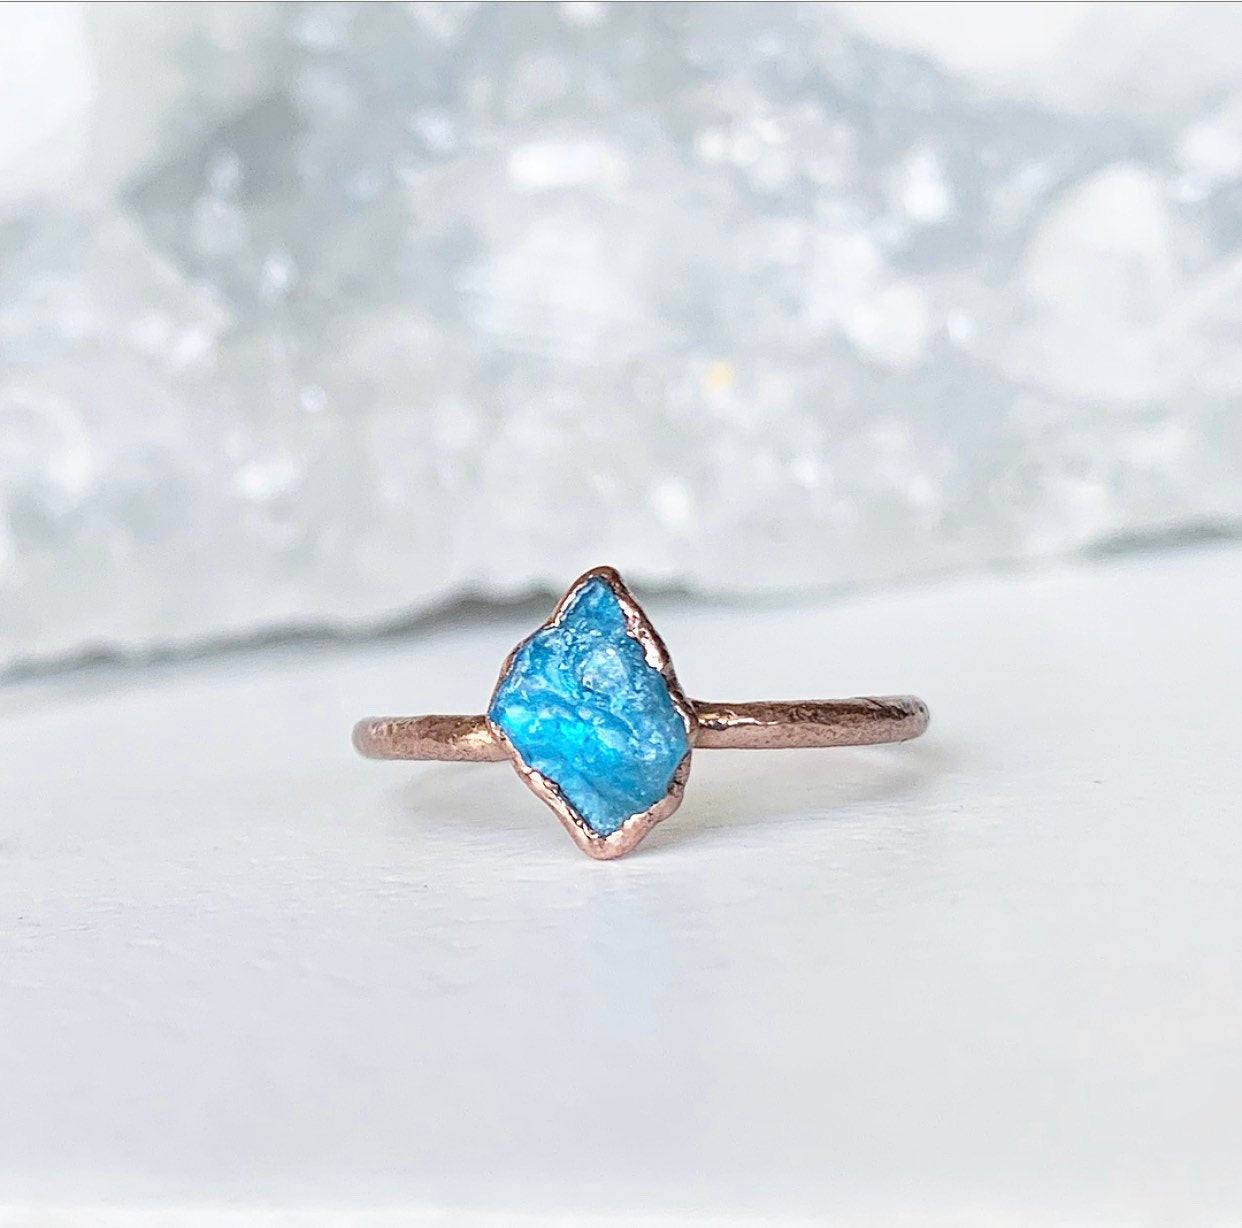 Dainty Apatite Crystal Ring, Delicate Crystal Jewelry, Tiny Stone Ring, Small Copper Stacking Ring, Raw Apatite Ring, Raw Blue Crystal Ring